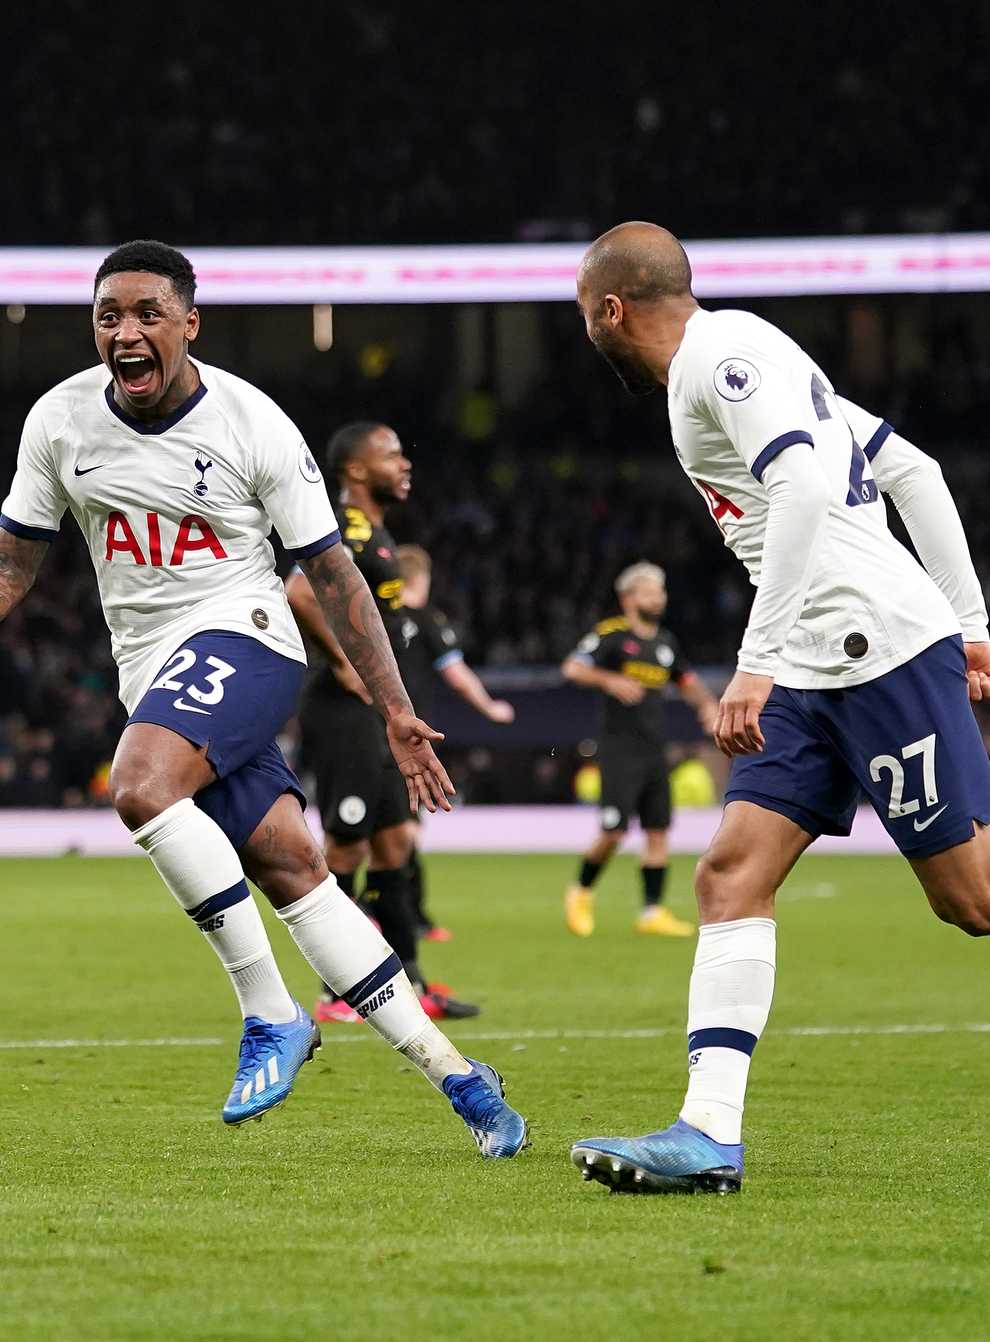 Steven Bergwijn scored on his debut in this fixture last season as Spurs beat Manchester City 2-0